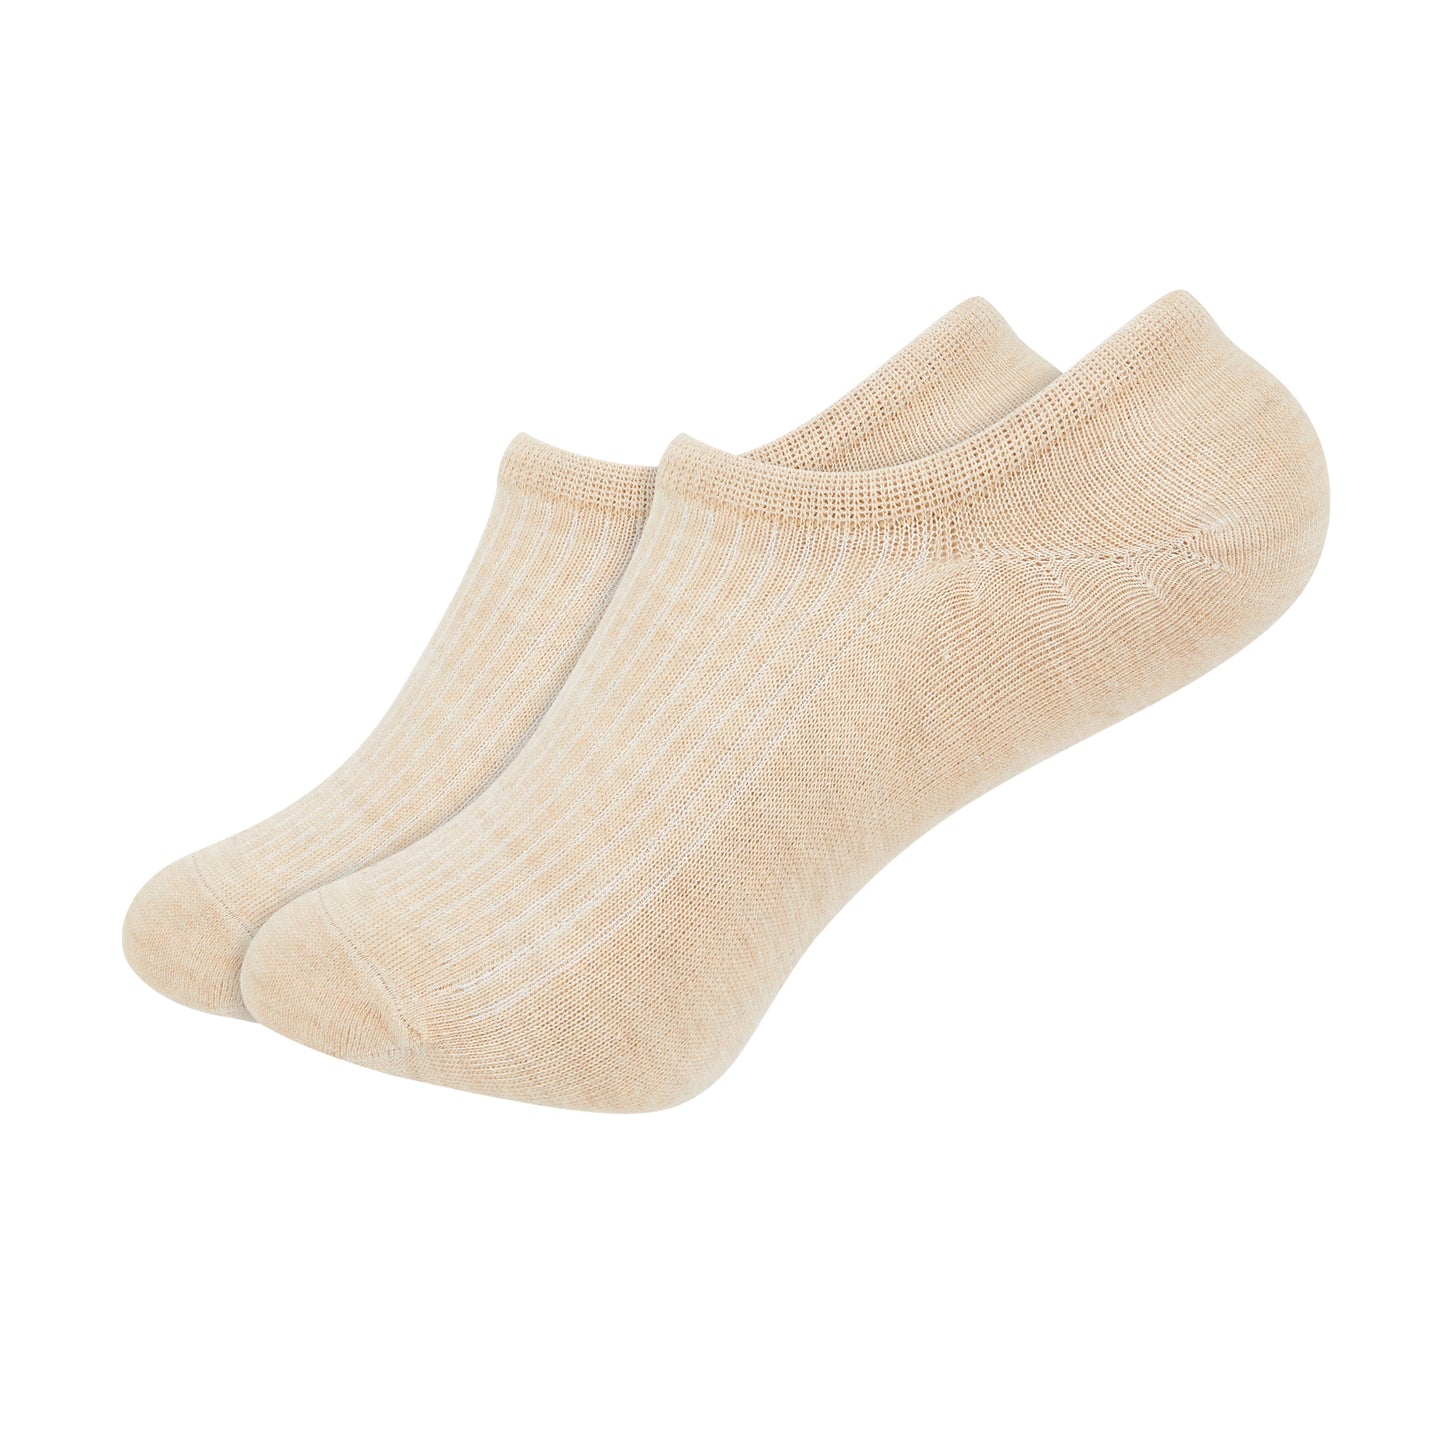 Womens Colored Striped Invisible Foot Socks - IDENTITY Apparel Shop